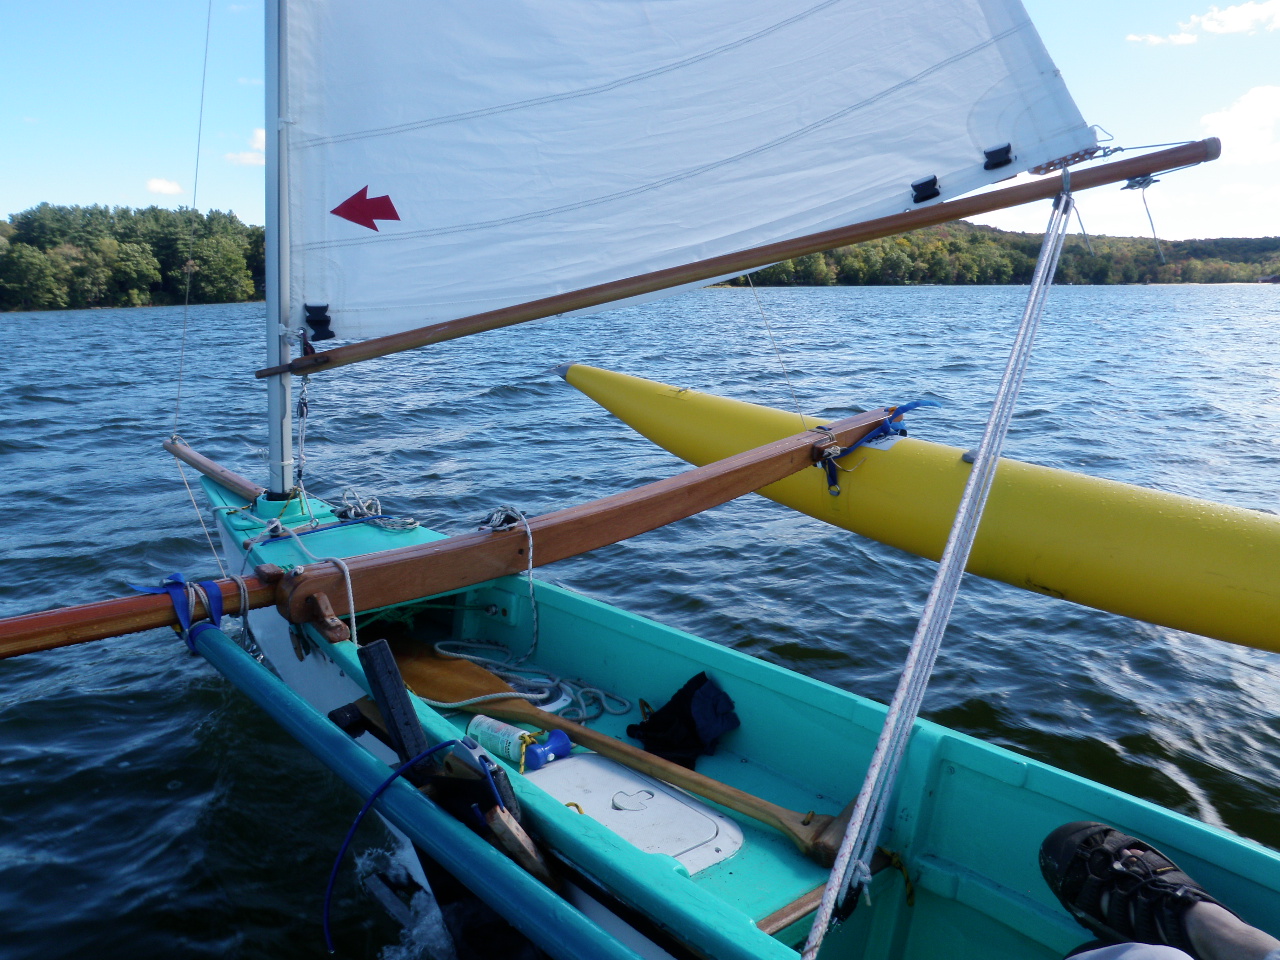 Designing and building a light, car-top-able outrigger sailing canoe [March 2016 update]